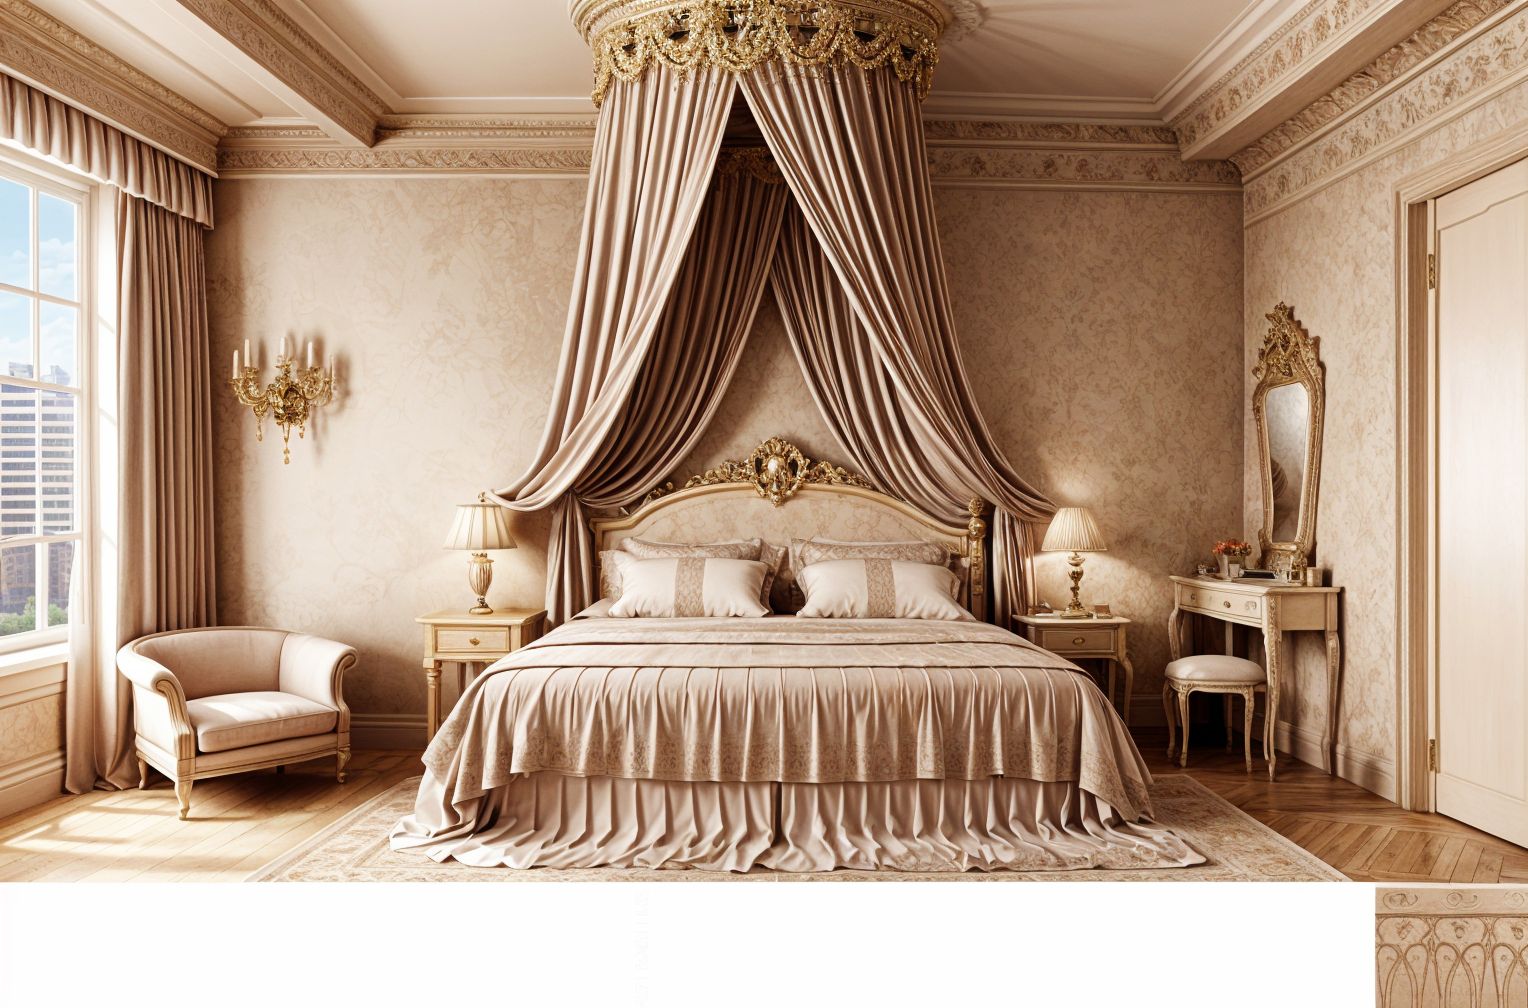 French Country Hotel Room